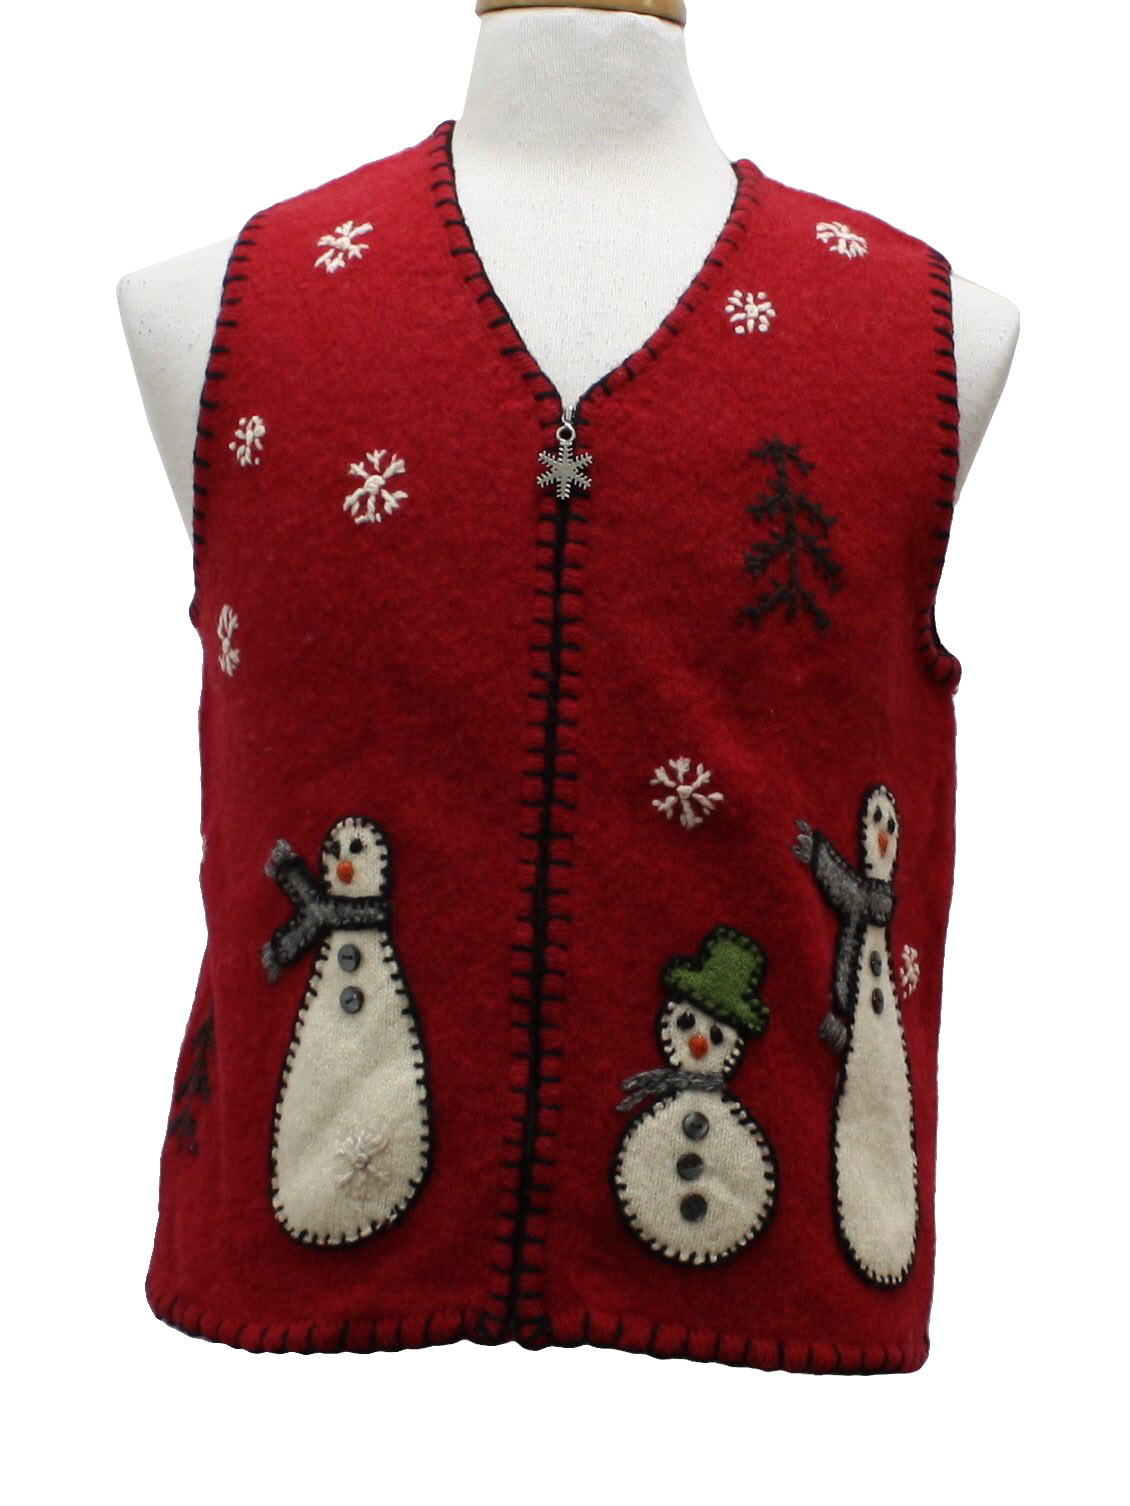 Womens Ugly Christmas Sweater Vest: -Coldwater Creek- Womens red ...